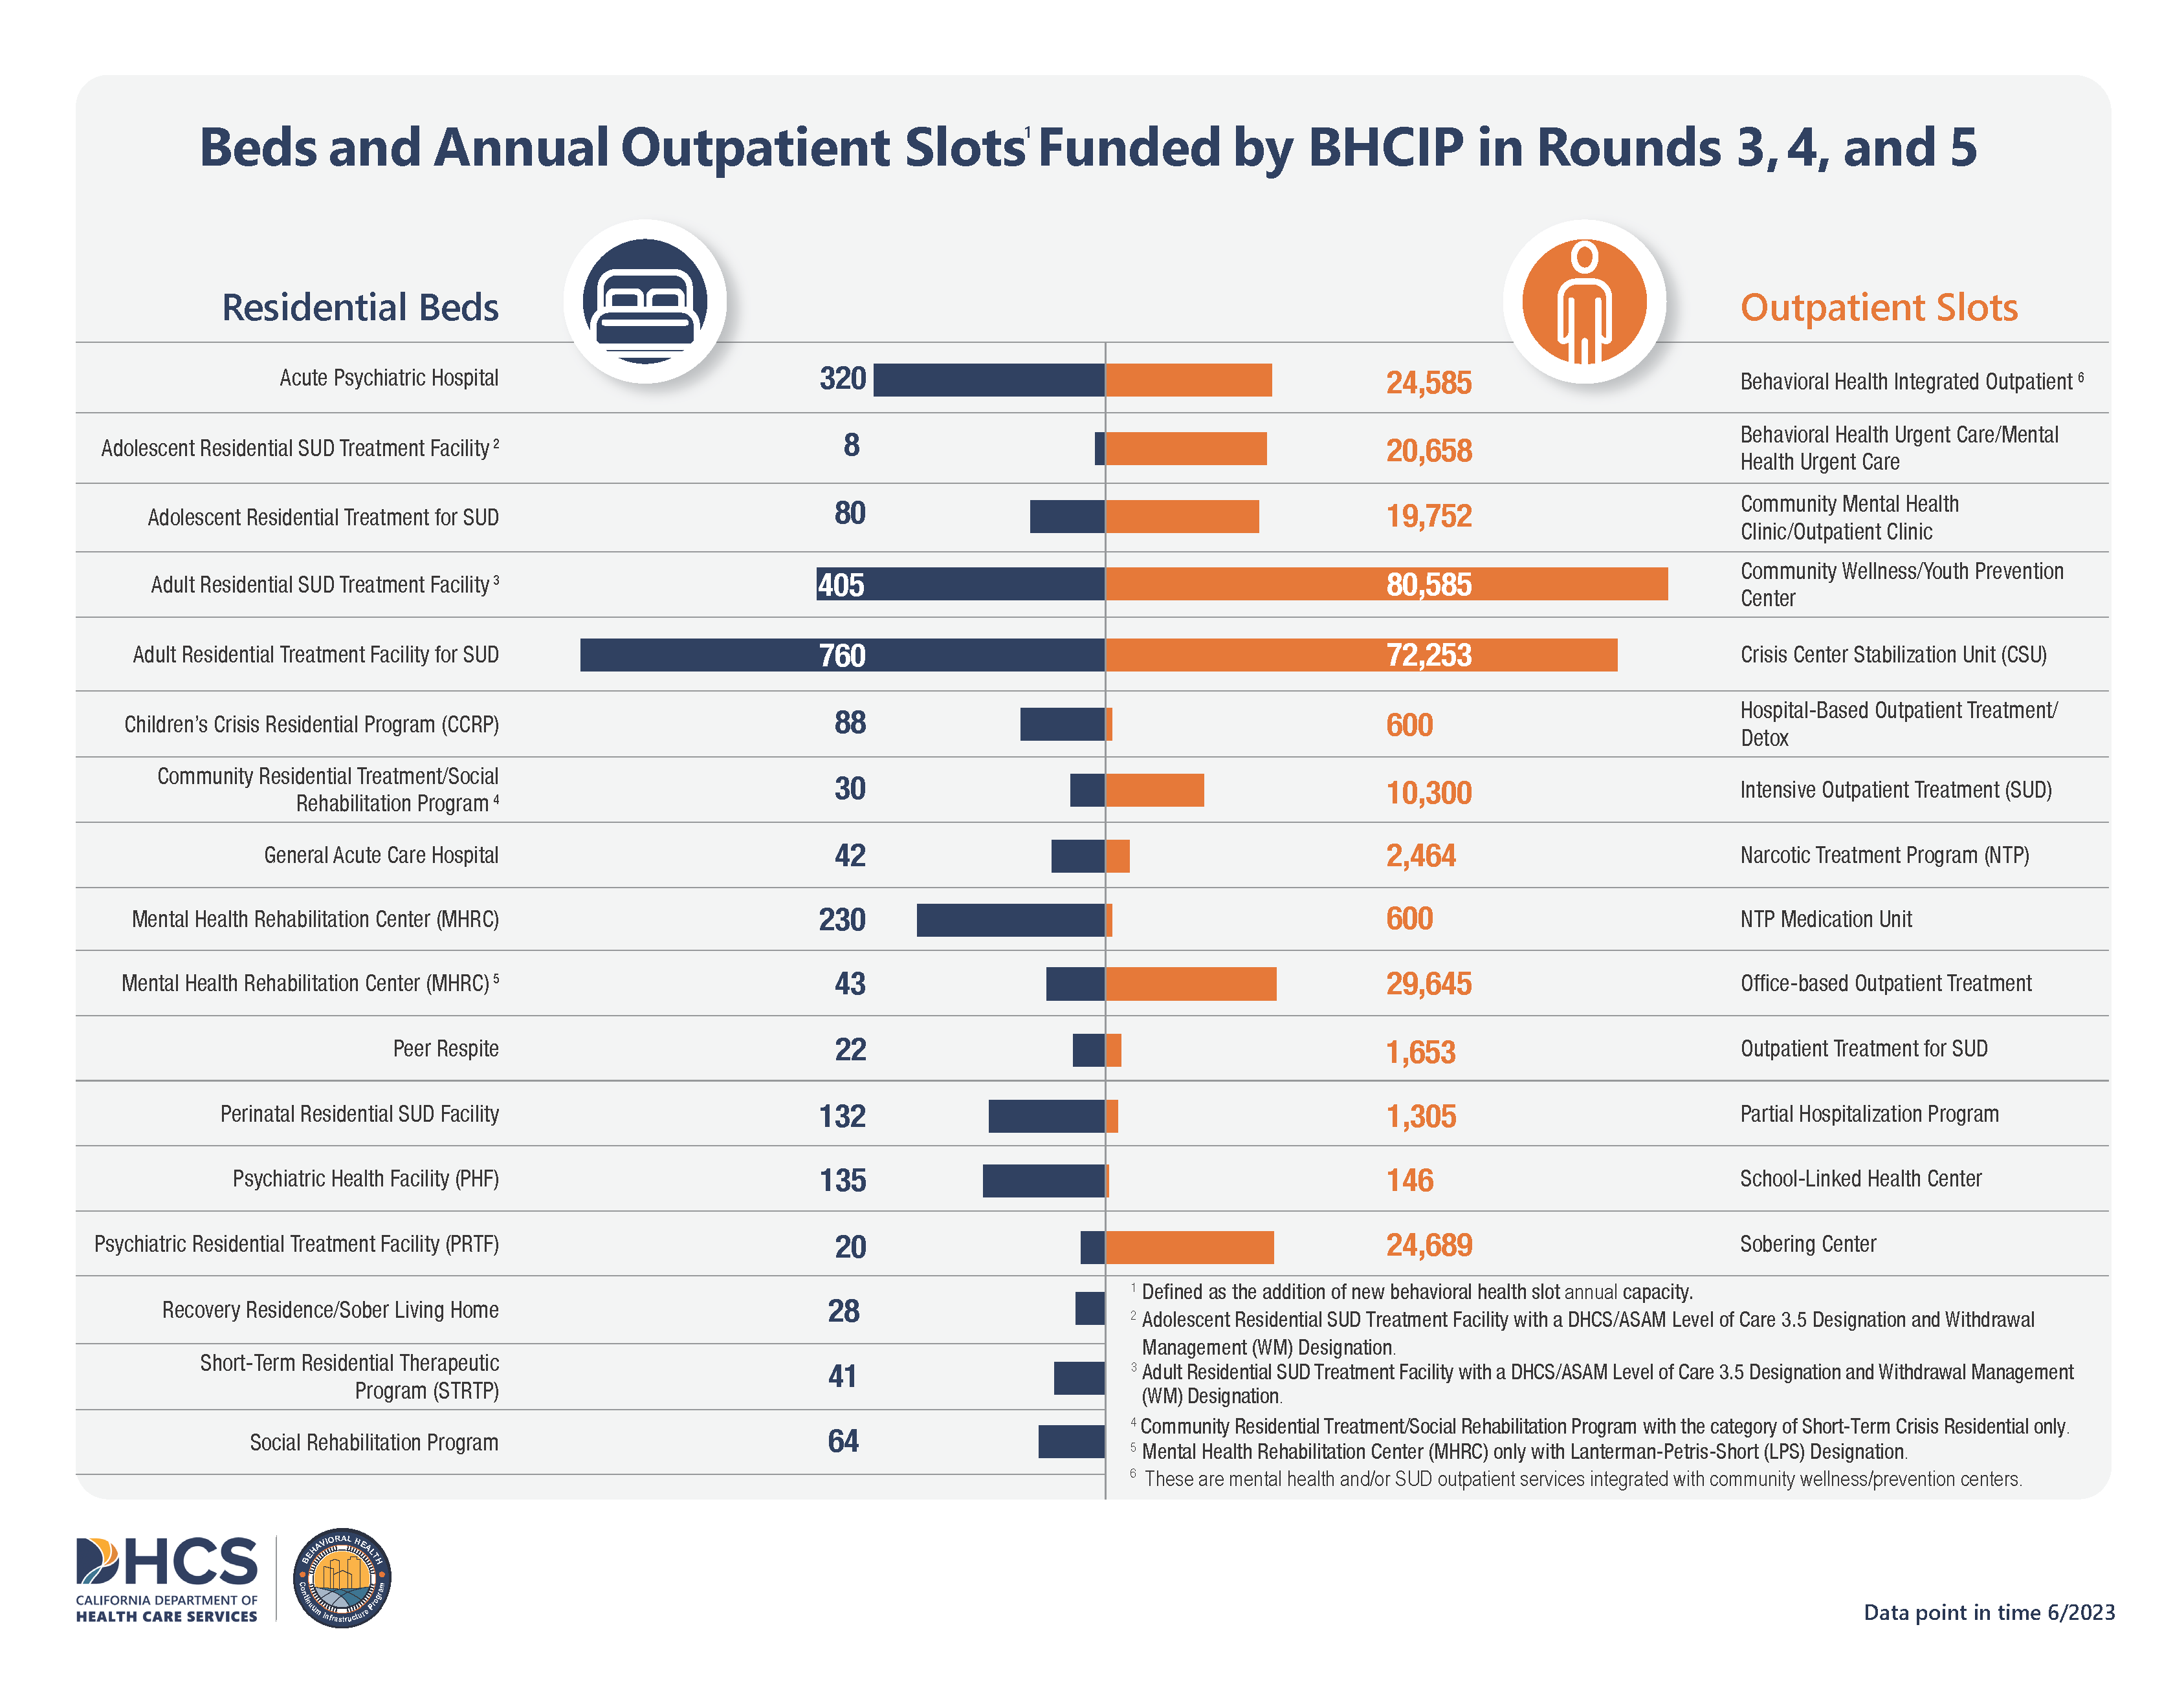 The Department of Health Care Services (DHCS) Beds and Annual Outpatient Slots Infographic